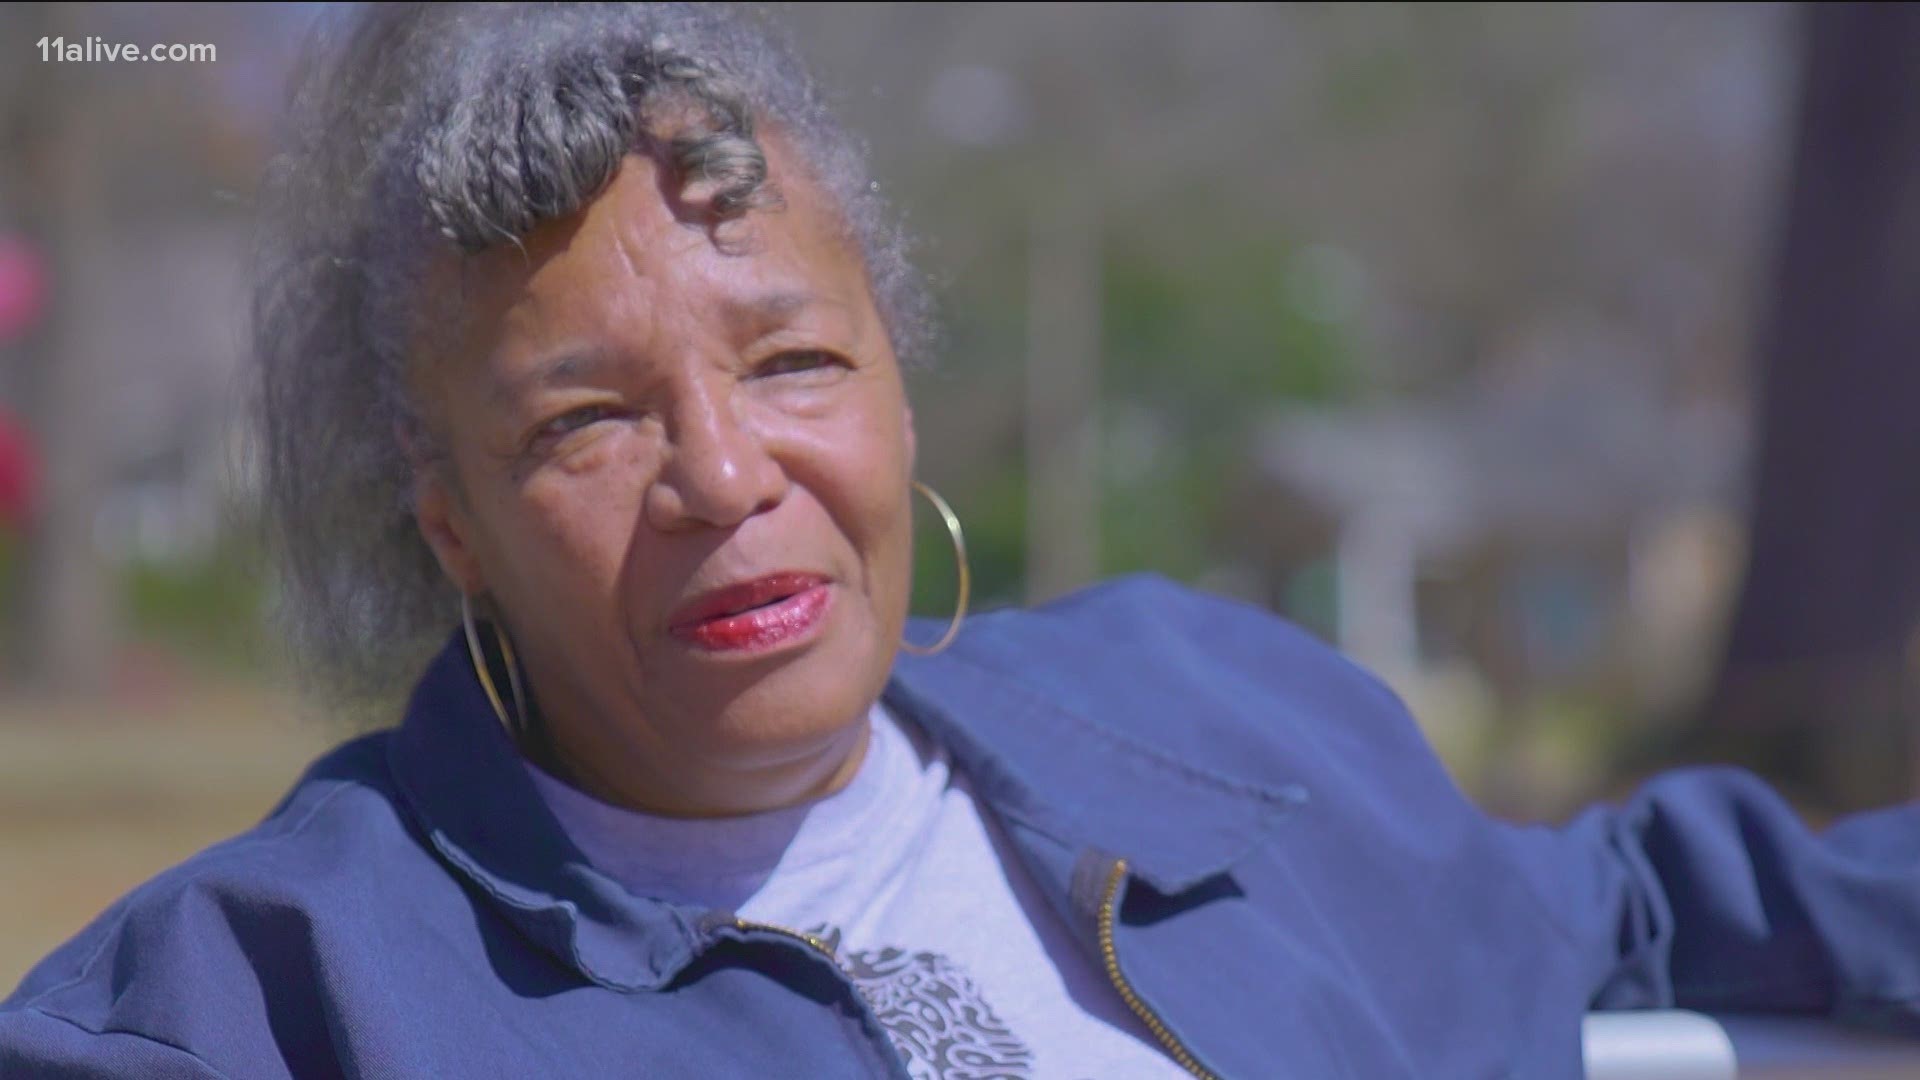 Marilynn Winn's one arrest snowballed into years of imprisonment. Now, the community activist fights for criminal justice reform.